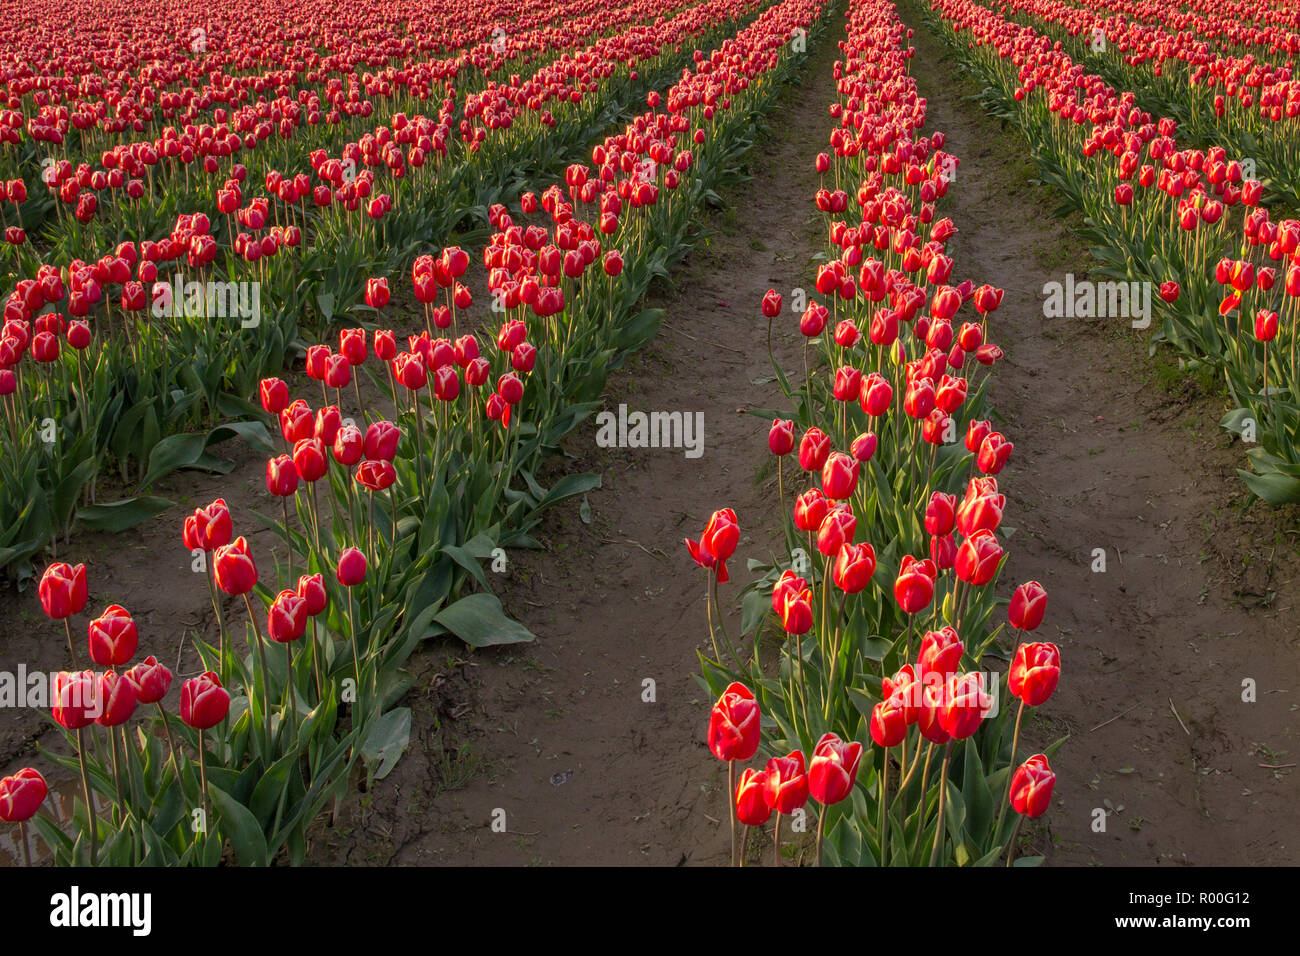 Converging rows of red and white tulips lead away from the foreground, lit by the golden rays of a setting sun Stock Photo